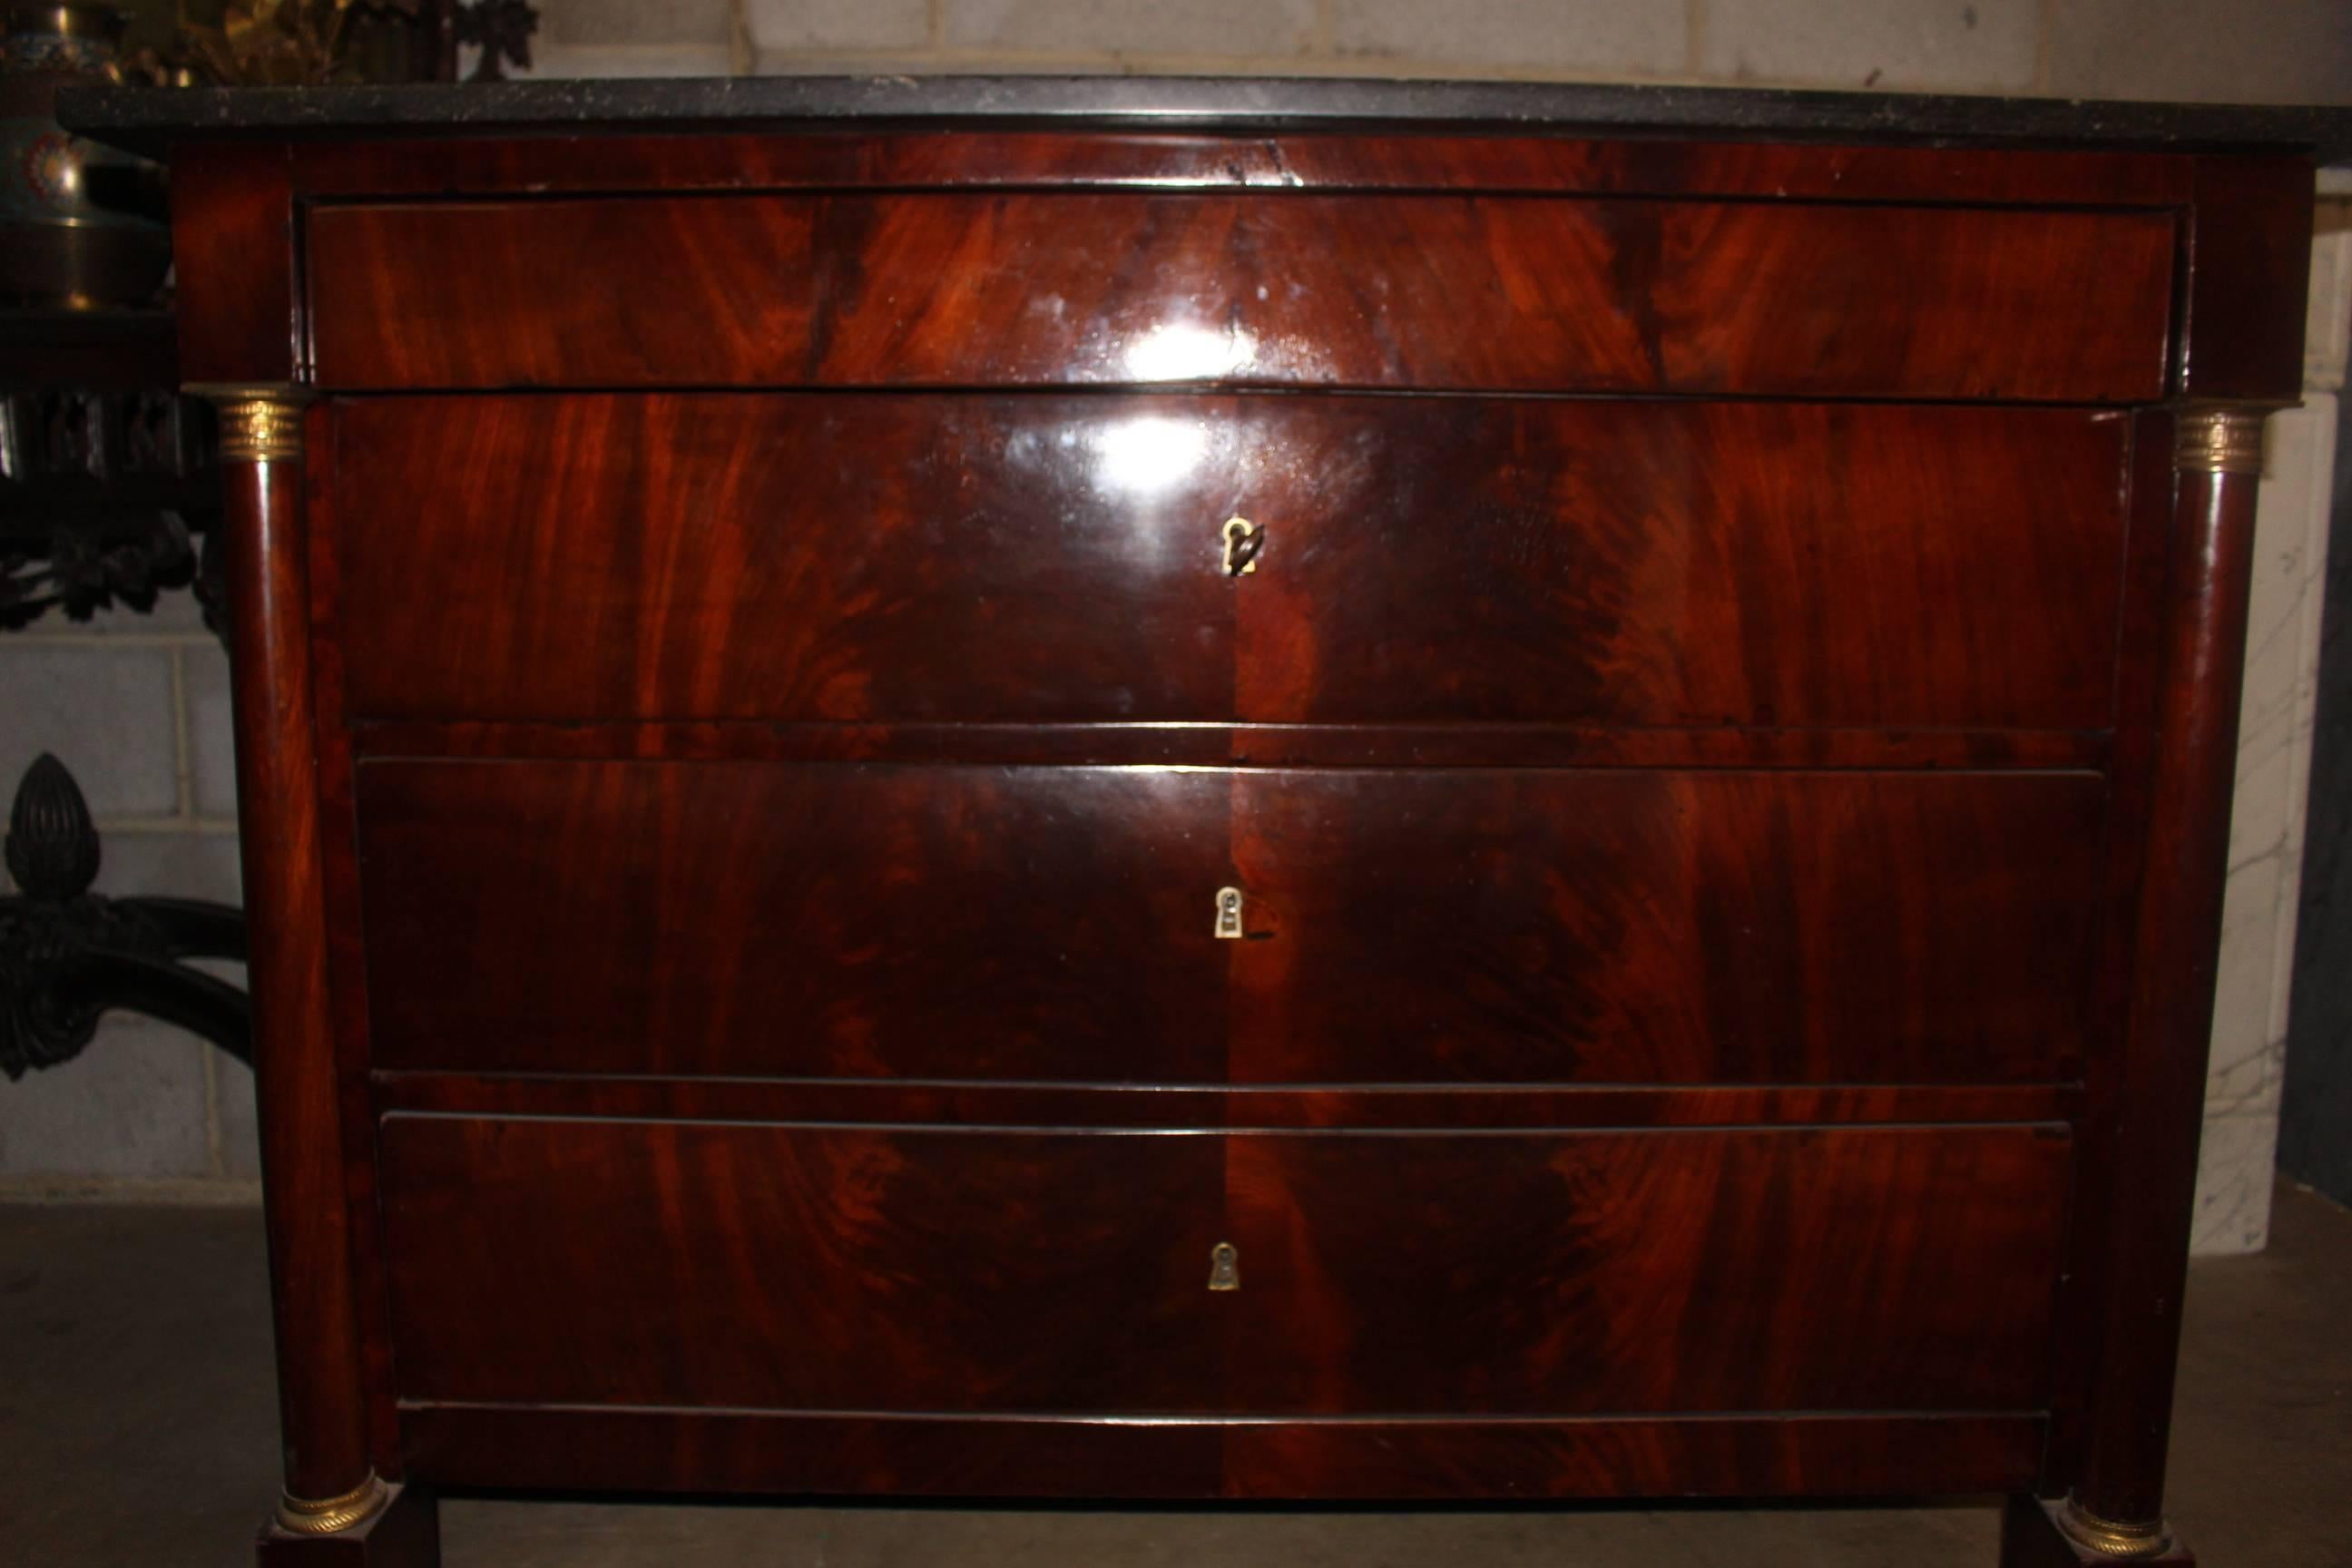 An early 19th century French Empire mahogany commode with bronze mounts and a dark gray stone top.  The chest of drawers is very handsome and functional and is in very good condition. There is a key that opens the drawer leaving the facade very